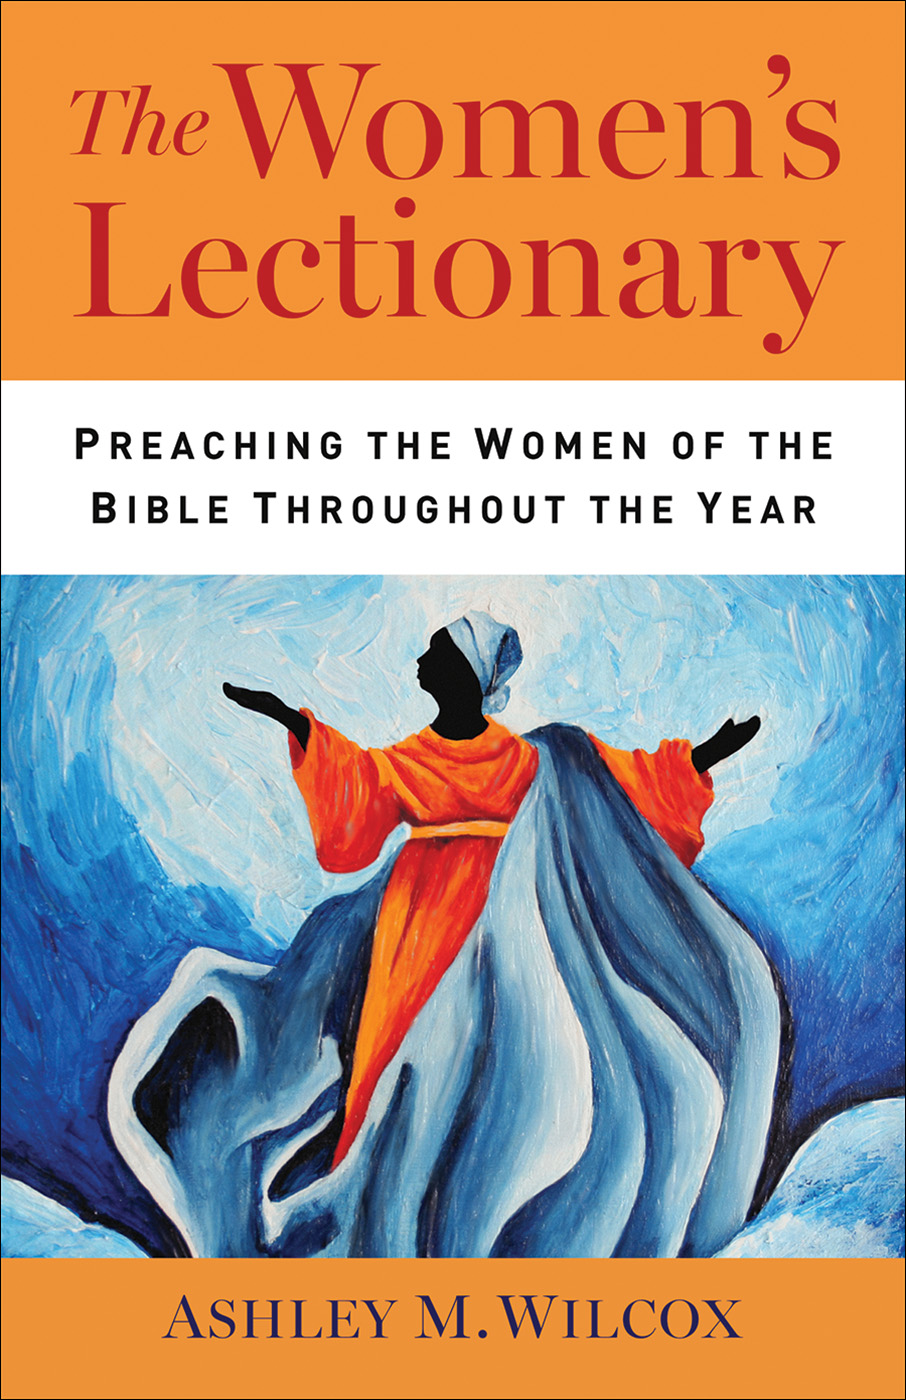 The Women's Lectionary